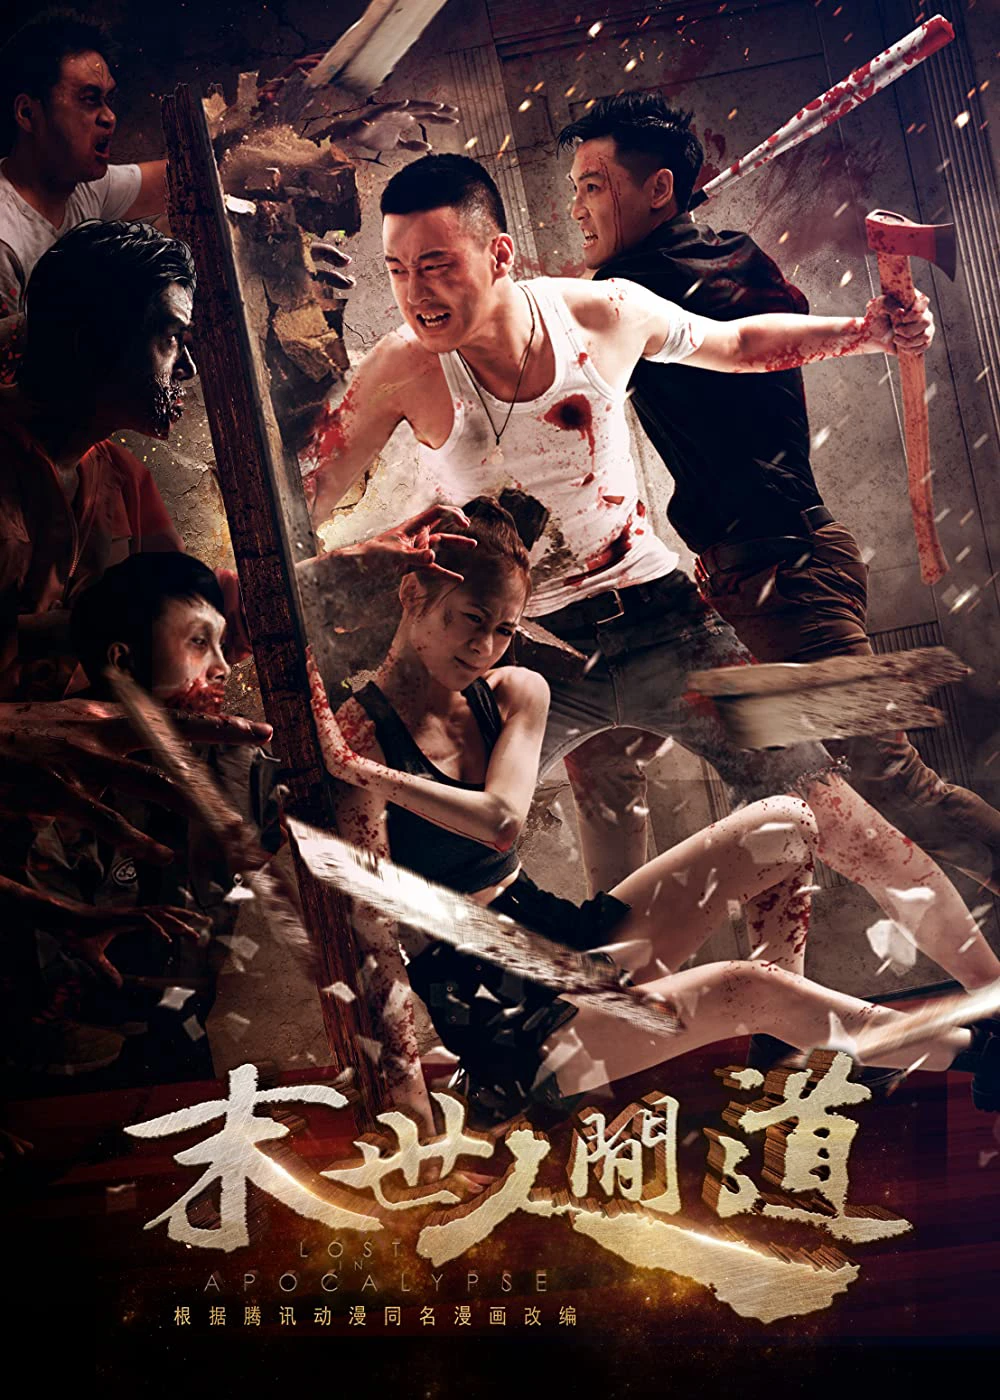 Lạc Giữa Bầy Xác Sống | Lost In Apocalypse (2018)